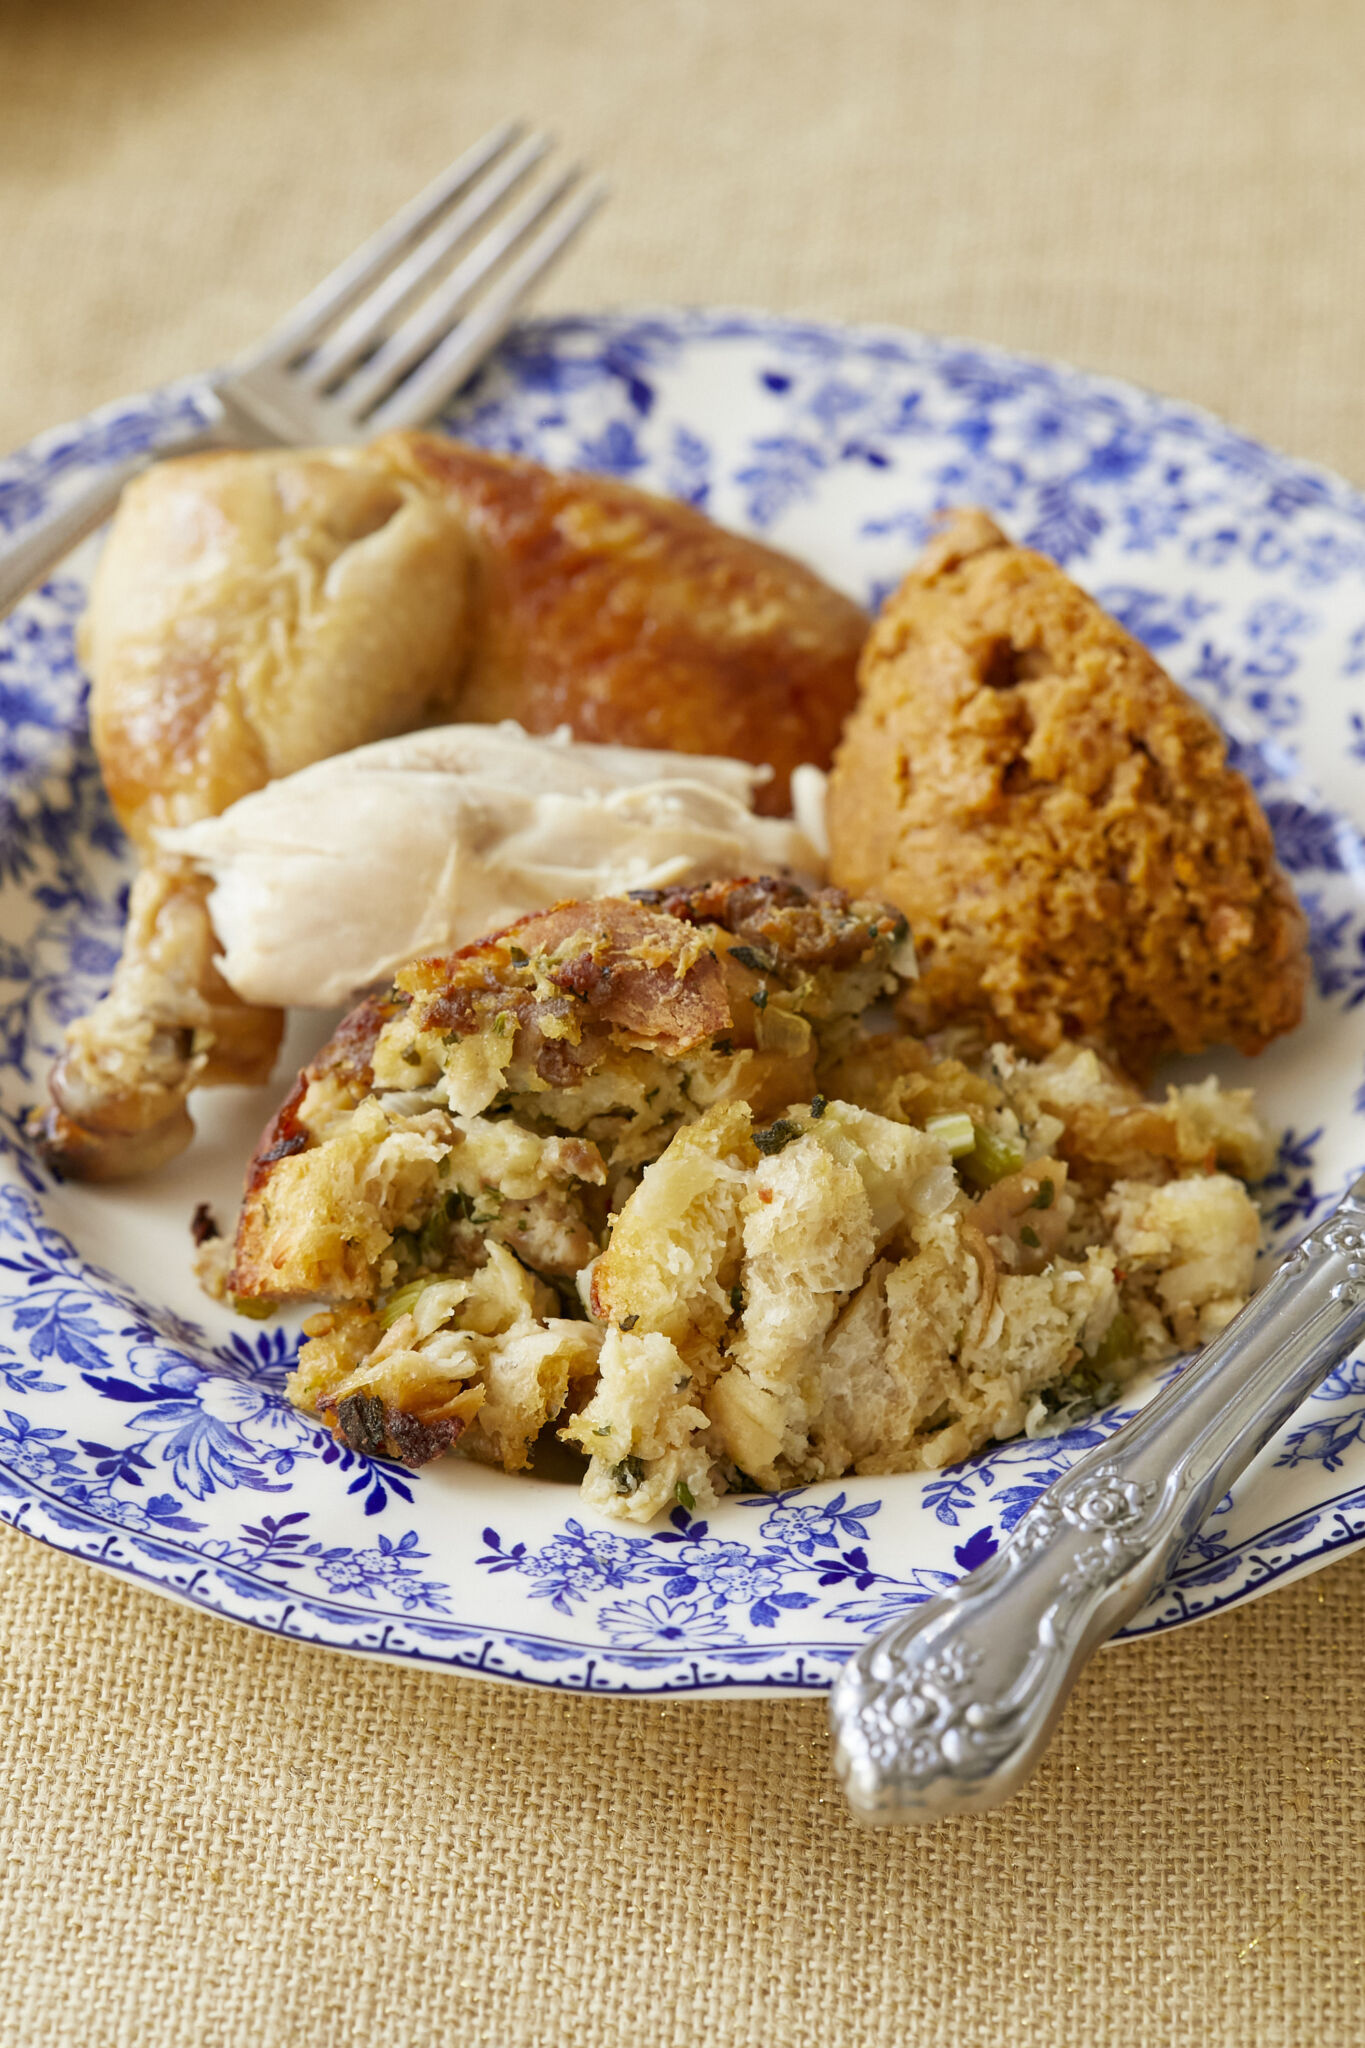 Classic Sage and sausage Stuffing is baked golden brown, with crispy bits on the outside and moist inside, paired with turkey and sweet potato soufflé served on a floral Devon Cottage plate. 